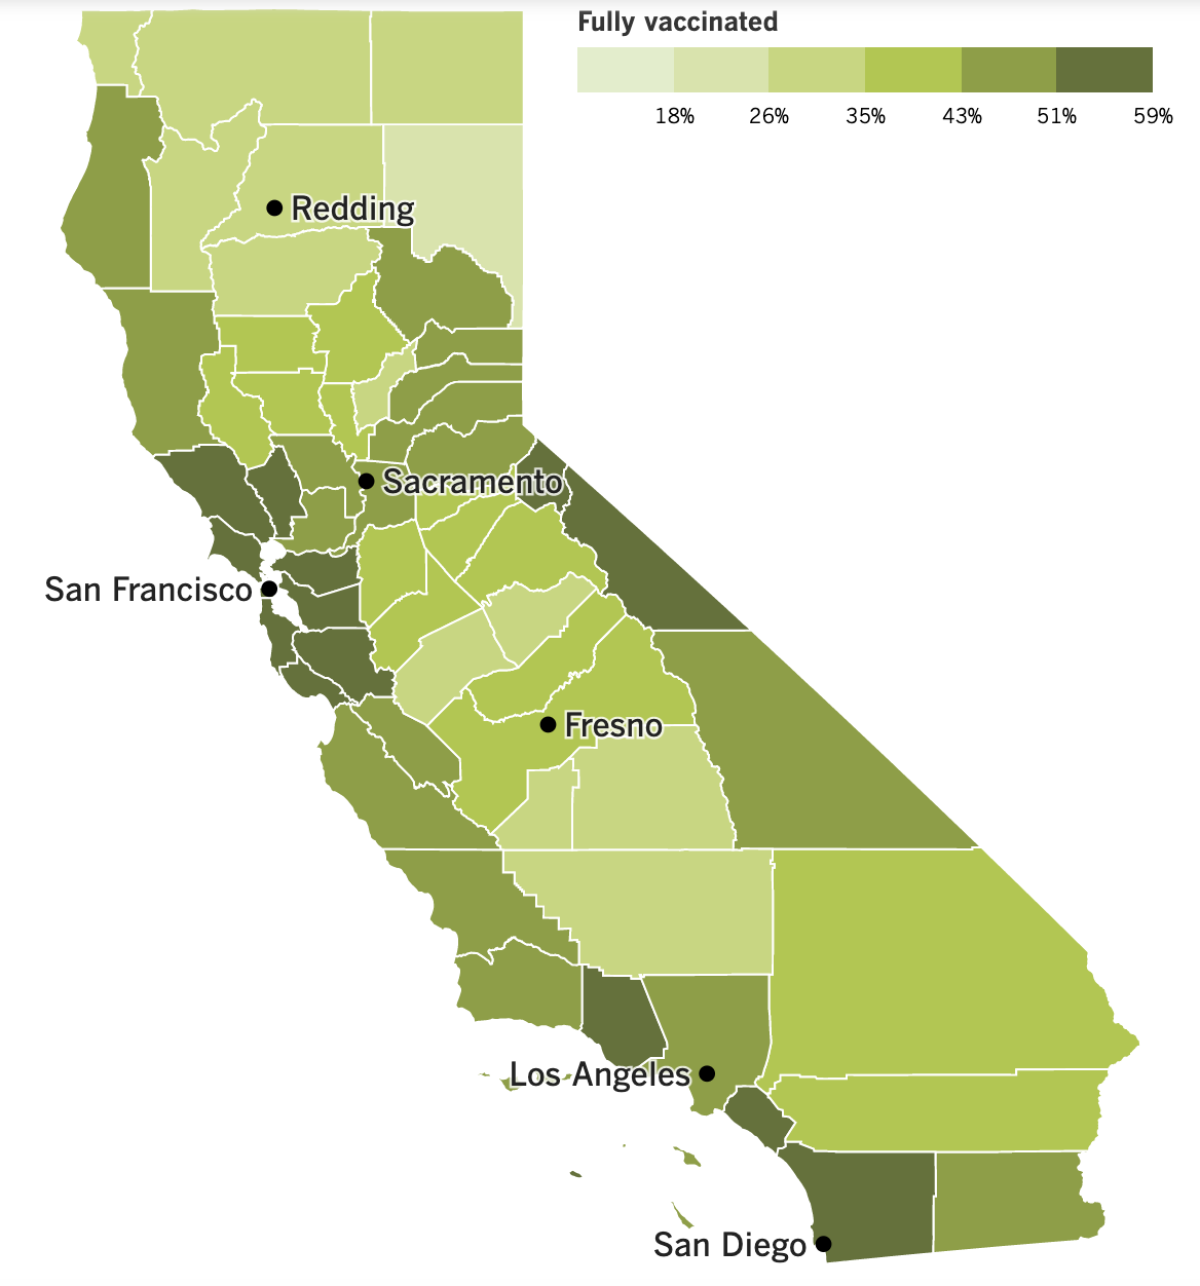 A map of the state that shows vaccination rates by county.